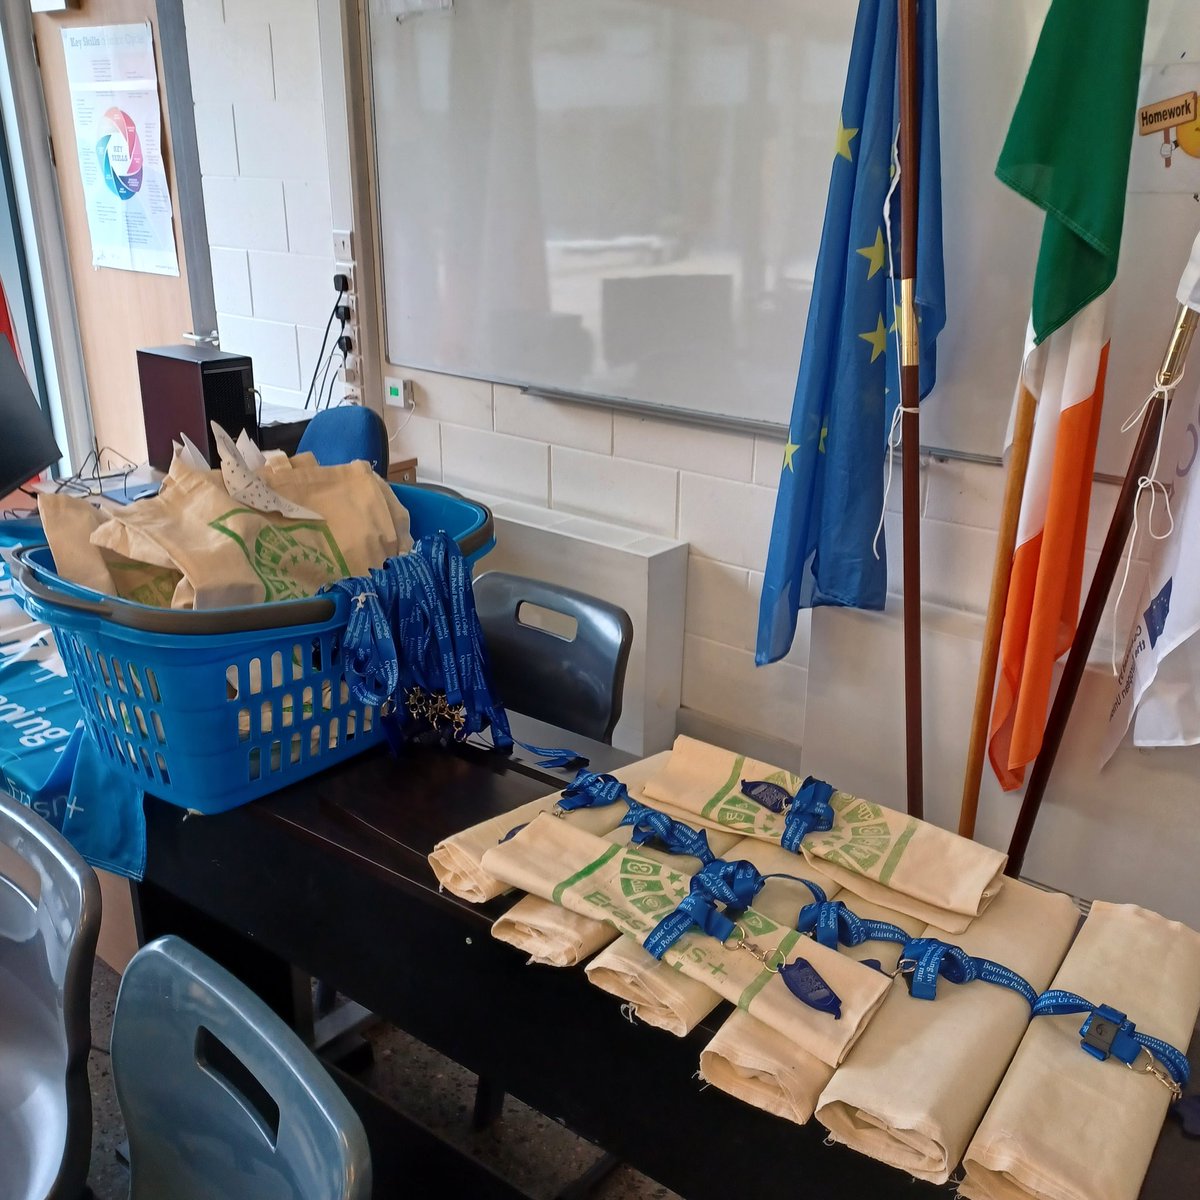 We made sustainable reusable bags decorated with the unsdgs for our European visitors. And gave them lanyards made of recyclable materials. @BorrisokaneCC @Take1_Programme @ETBIreland @TipperaryETB 
#unsdgs
@etbi_sdgs